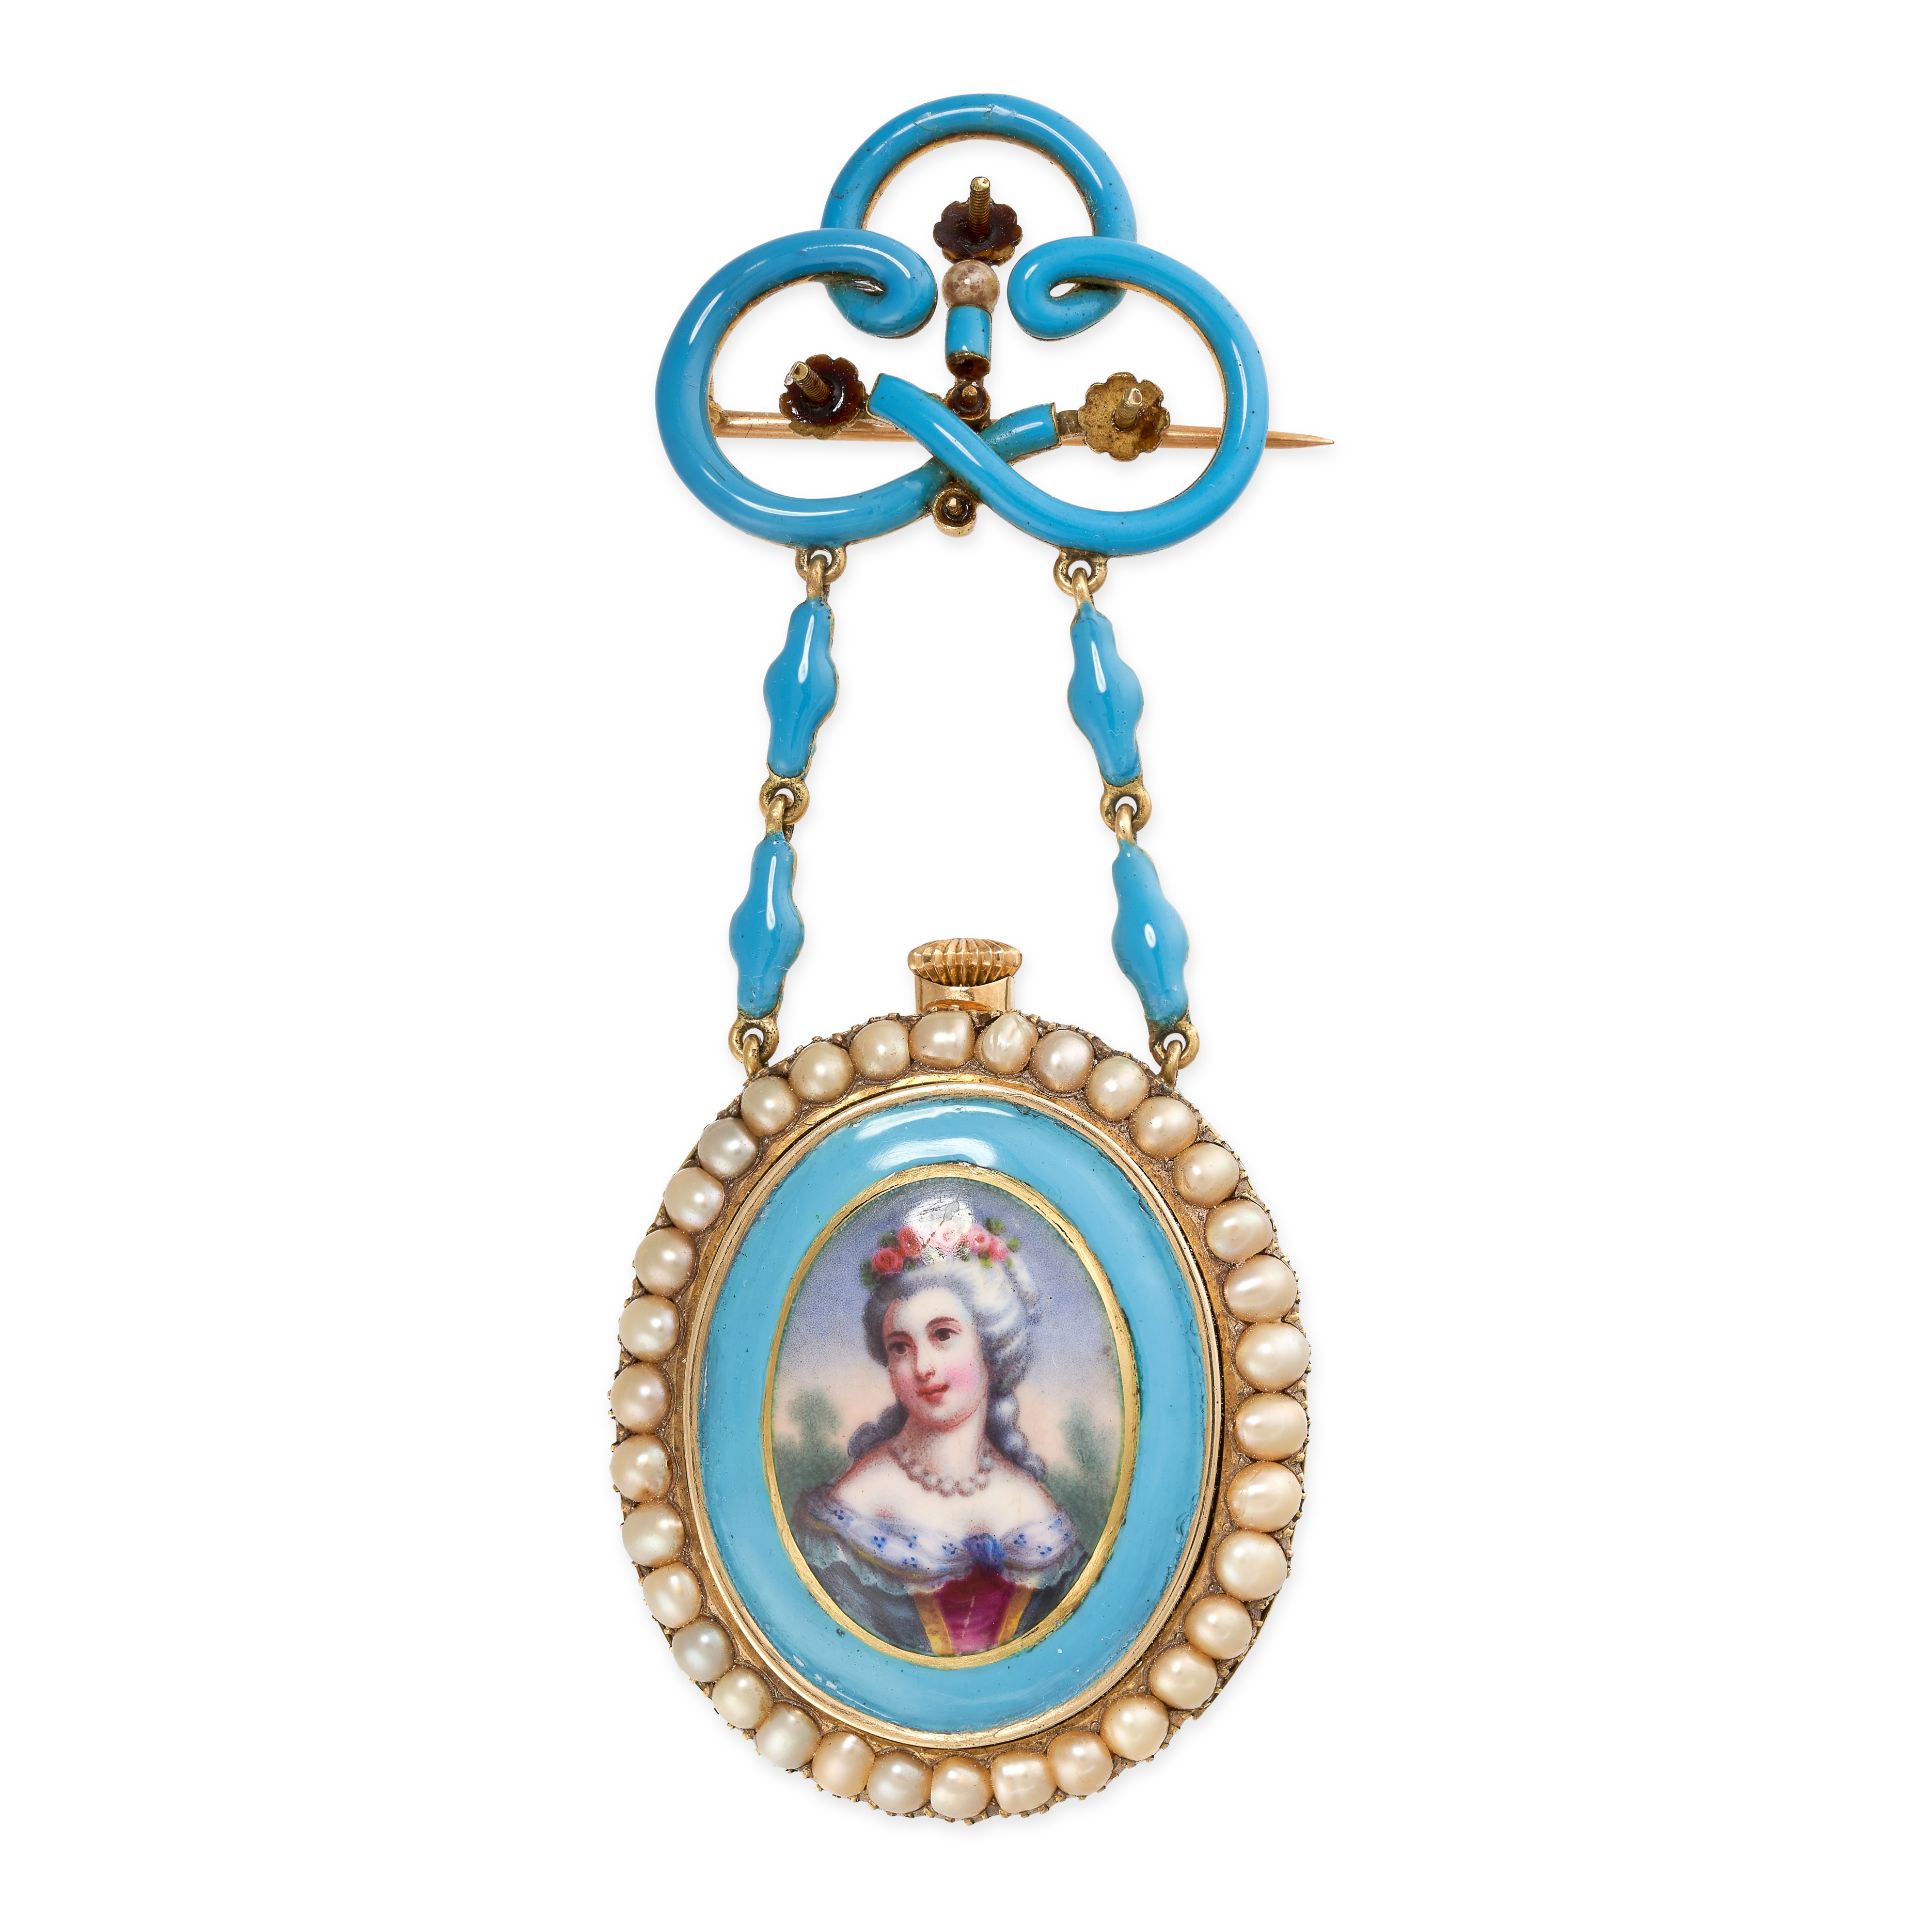 TIFFANY & CO, AN ANTIQUE ENAMEL AND PEARL POCKET WATCH in yellow gold, comprising a knotted motif